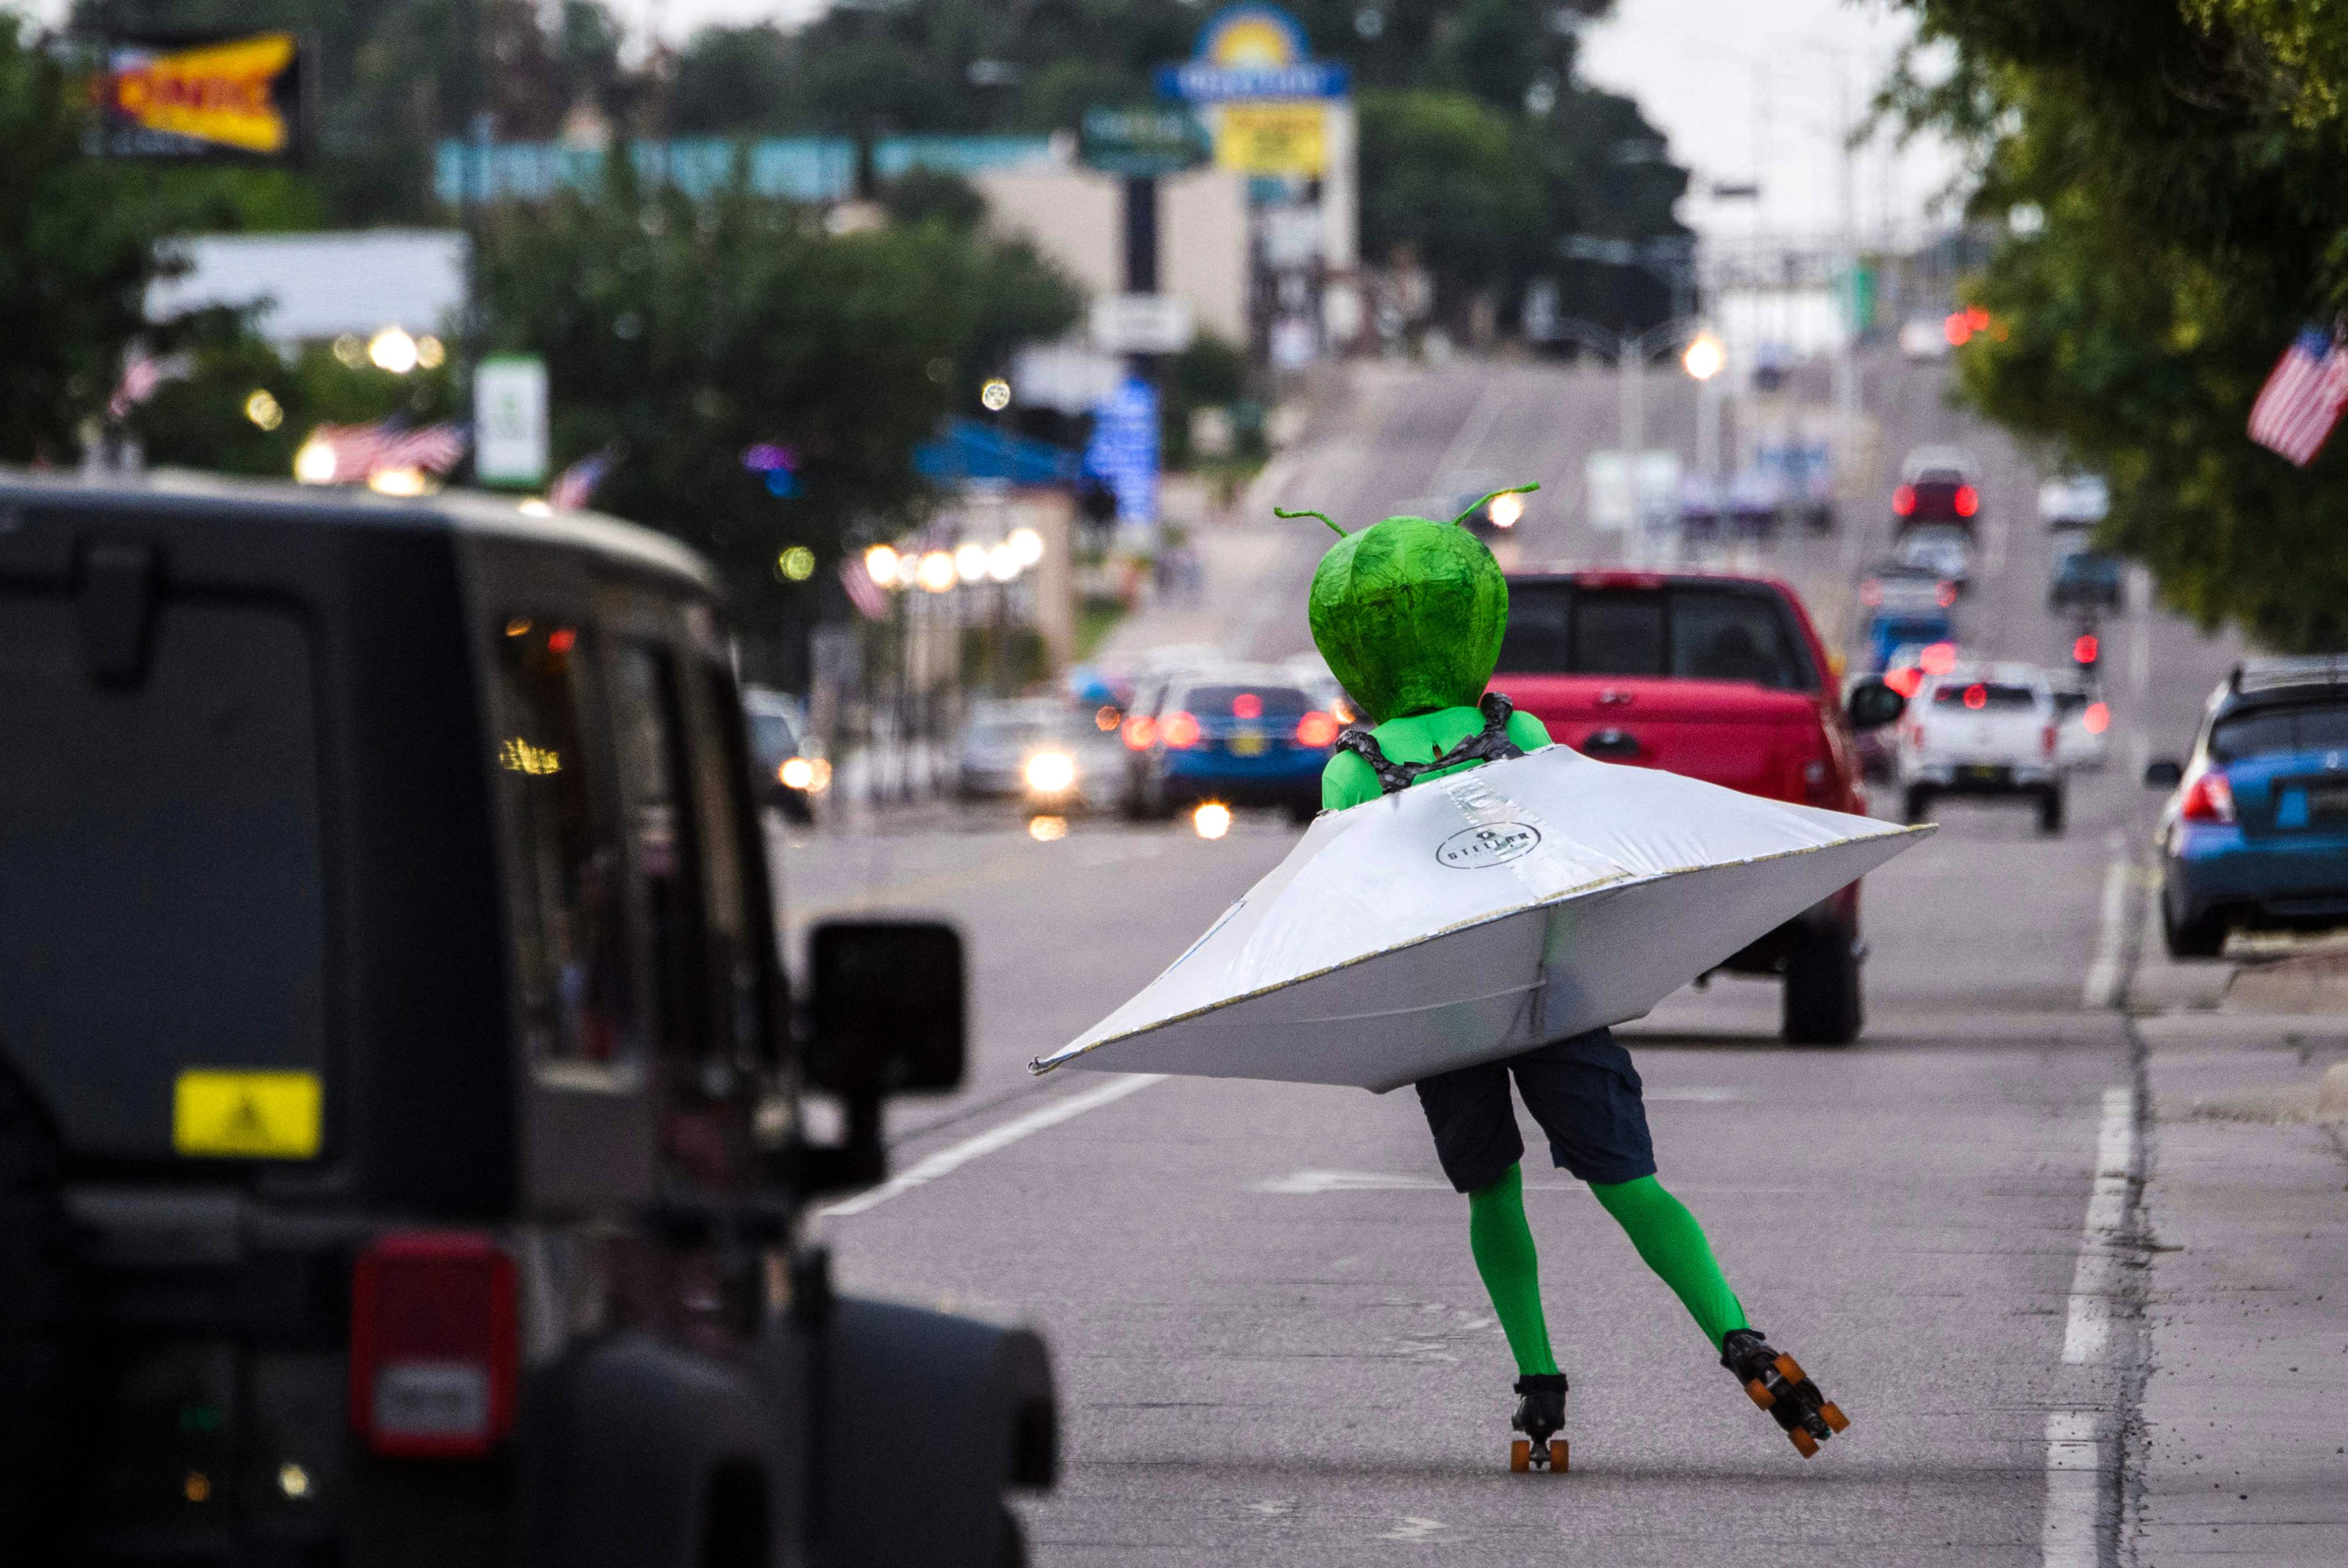 A person wearing an alien costume in a flying saucer roller skates through traffic in Roswell, New Mexico, during the UFO Festival in July 2021. Photo: AFP